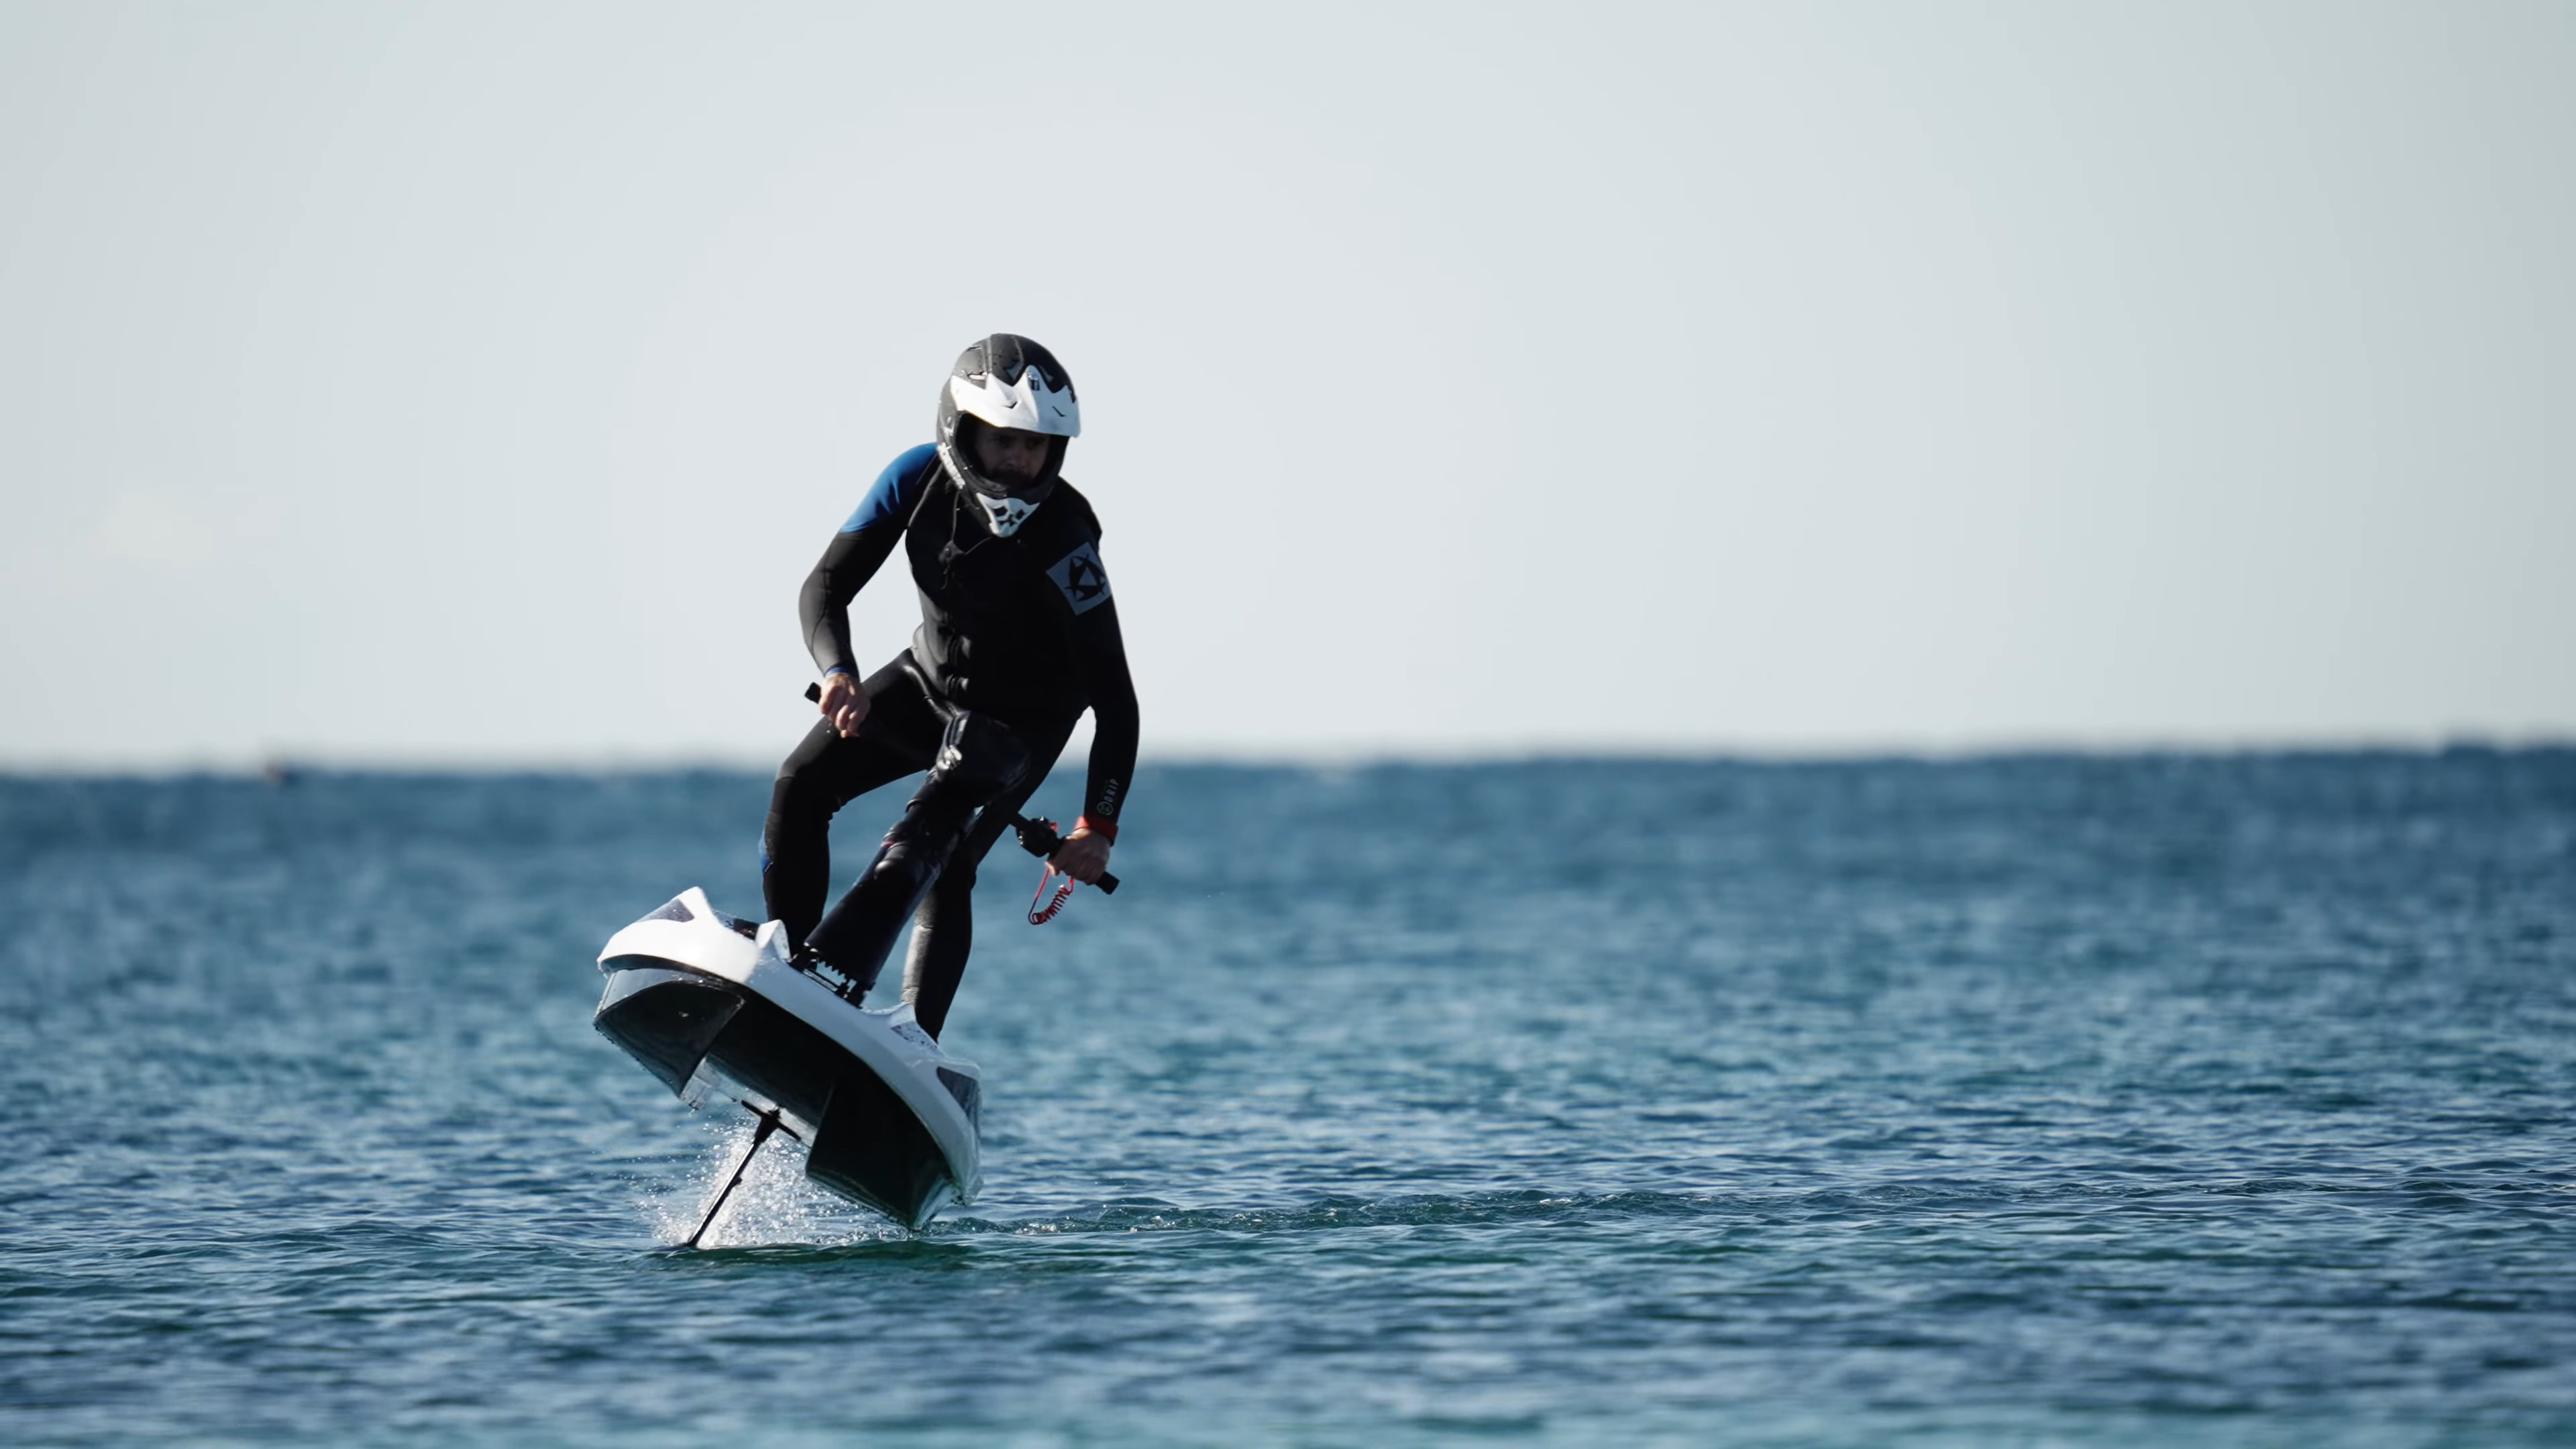 Weird Electric Jet Skis Are Hitting The Waves | Hackaday